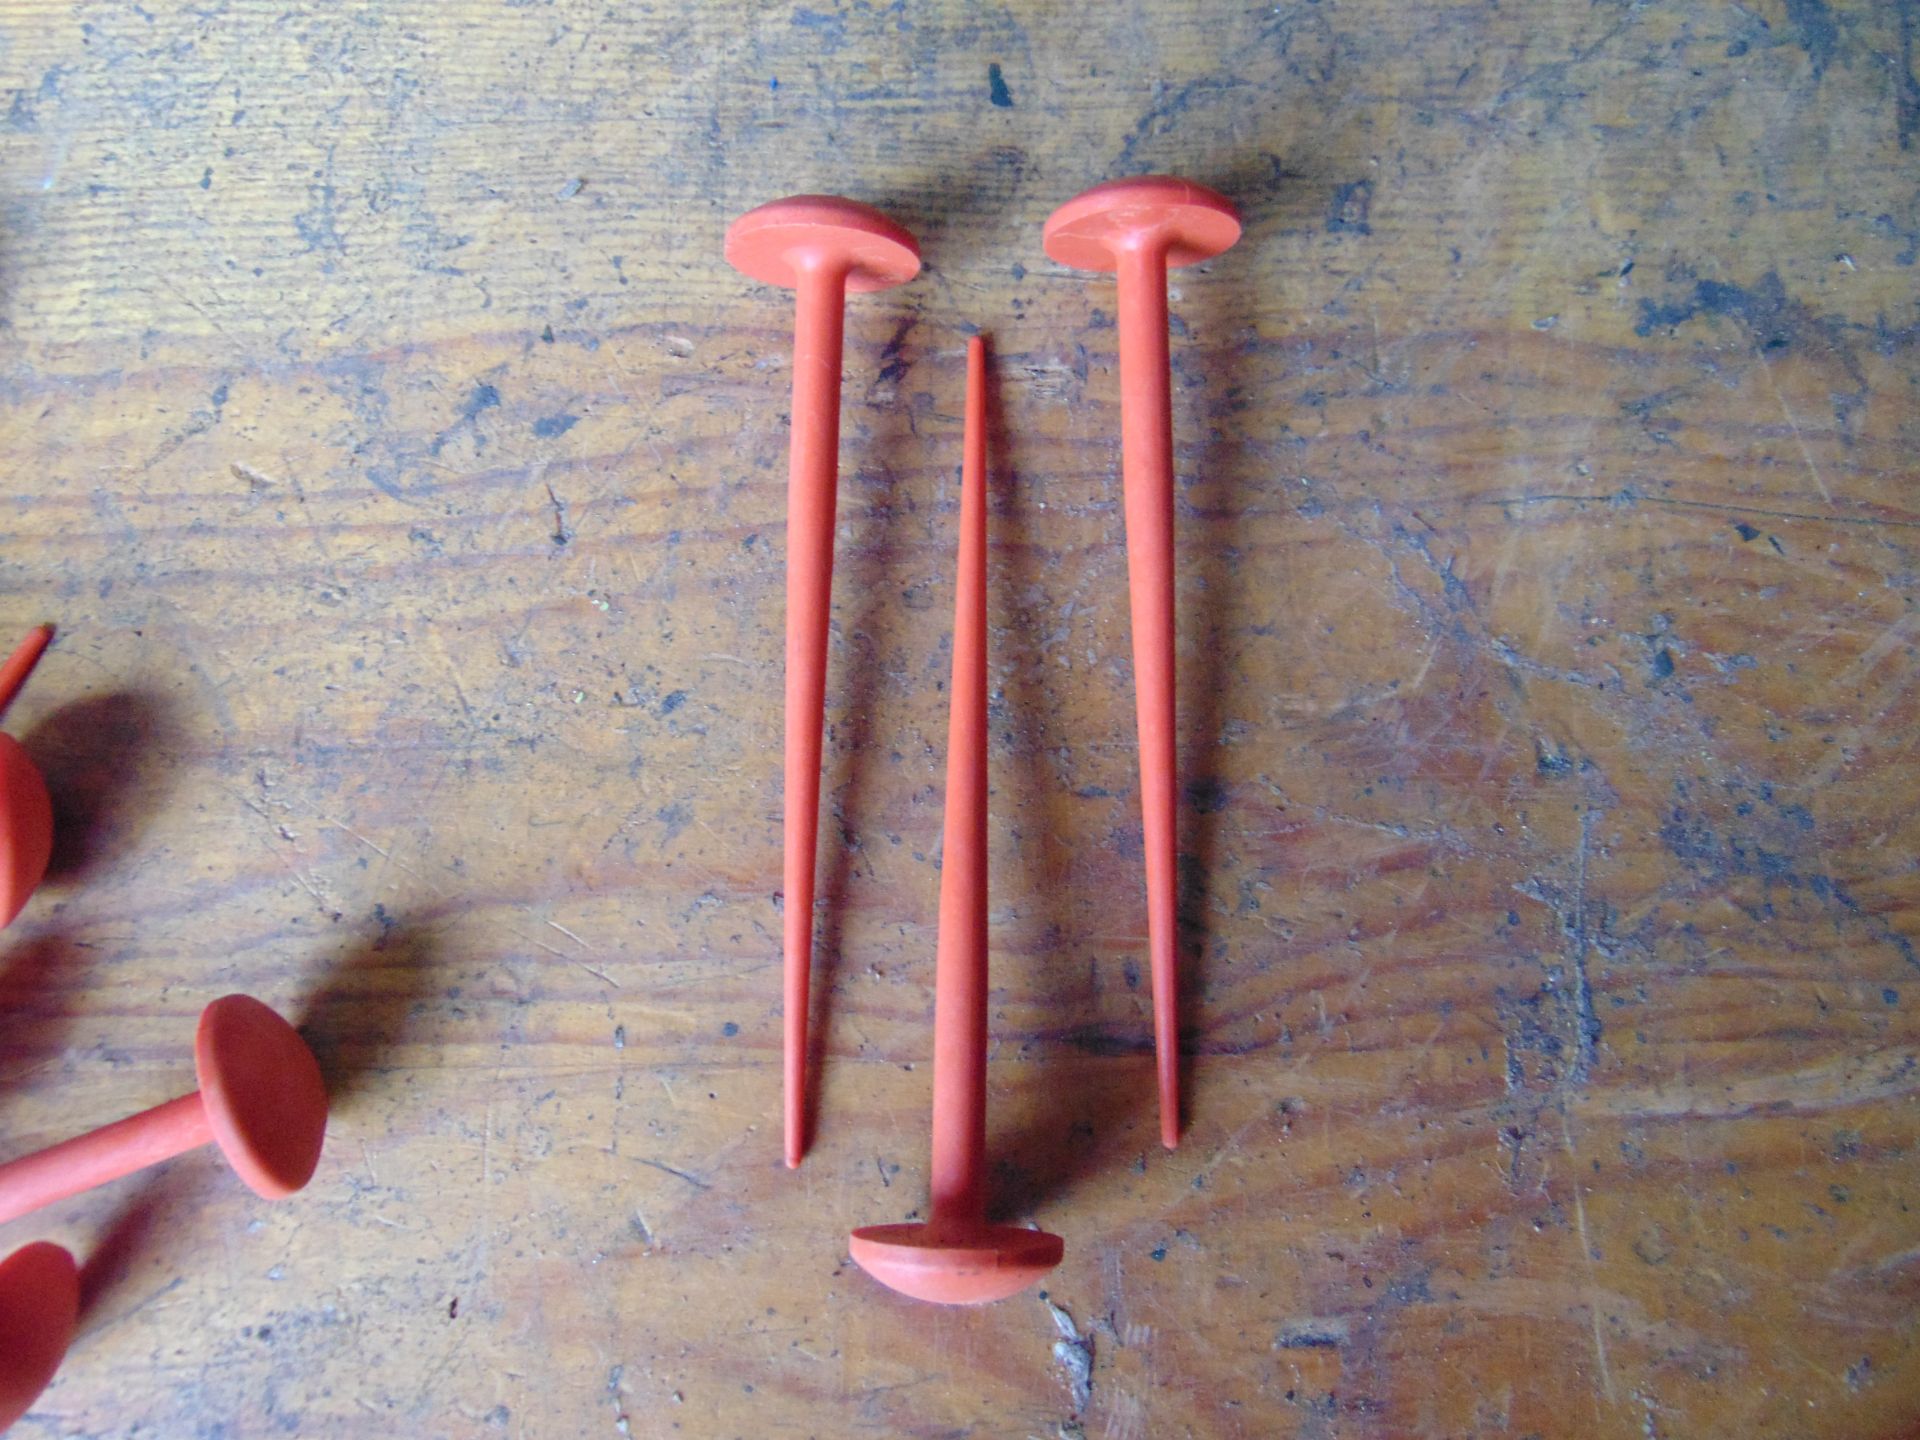 New Unissued Approx. 1000 Red Plastic Ground Marking Spikes - Image 3 of 4